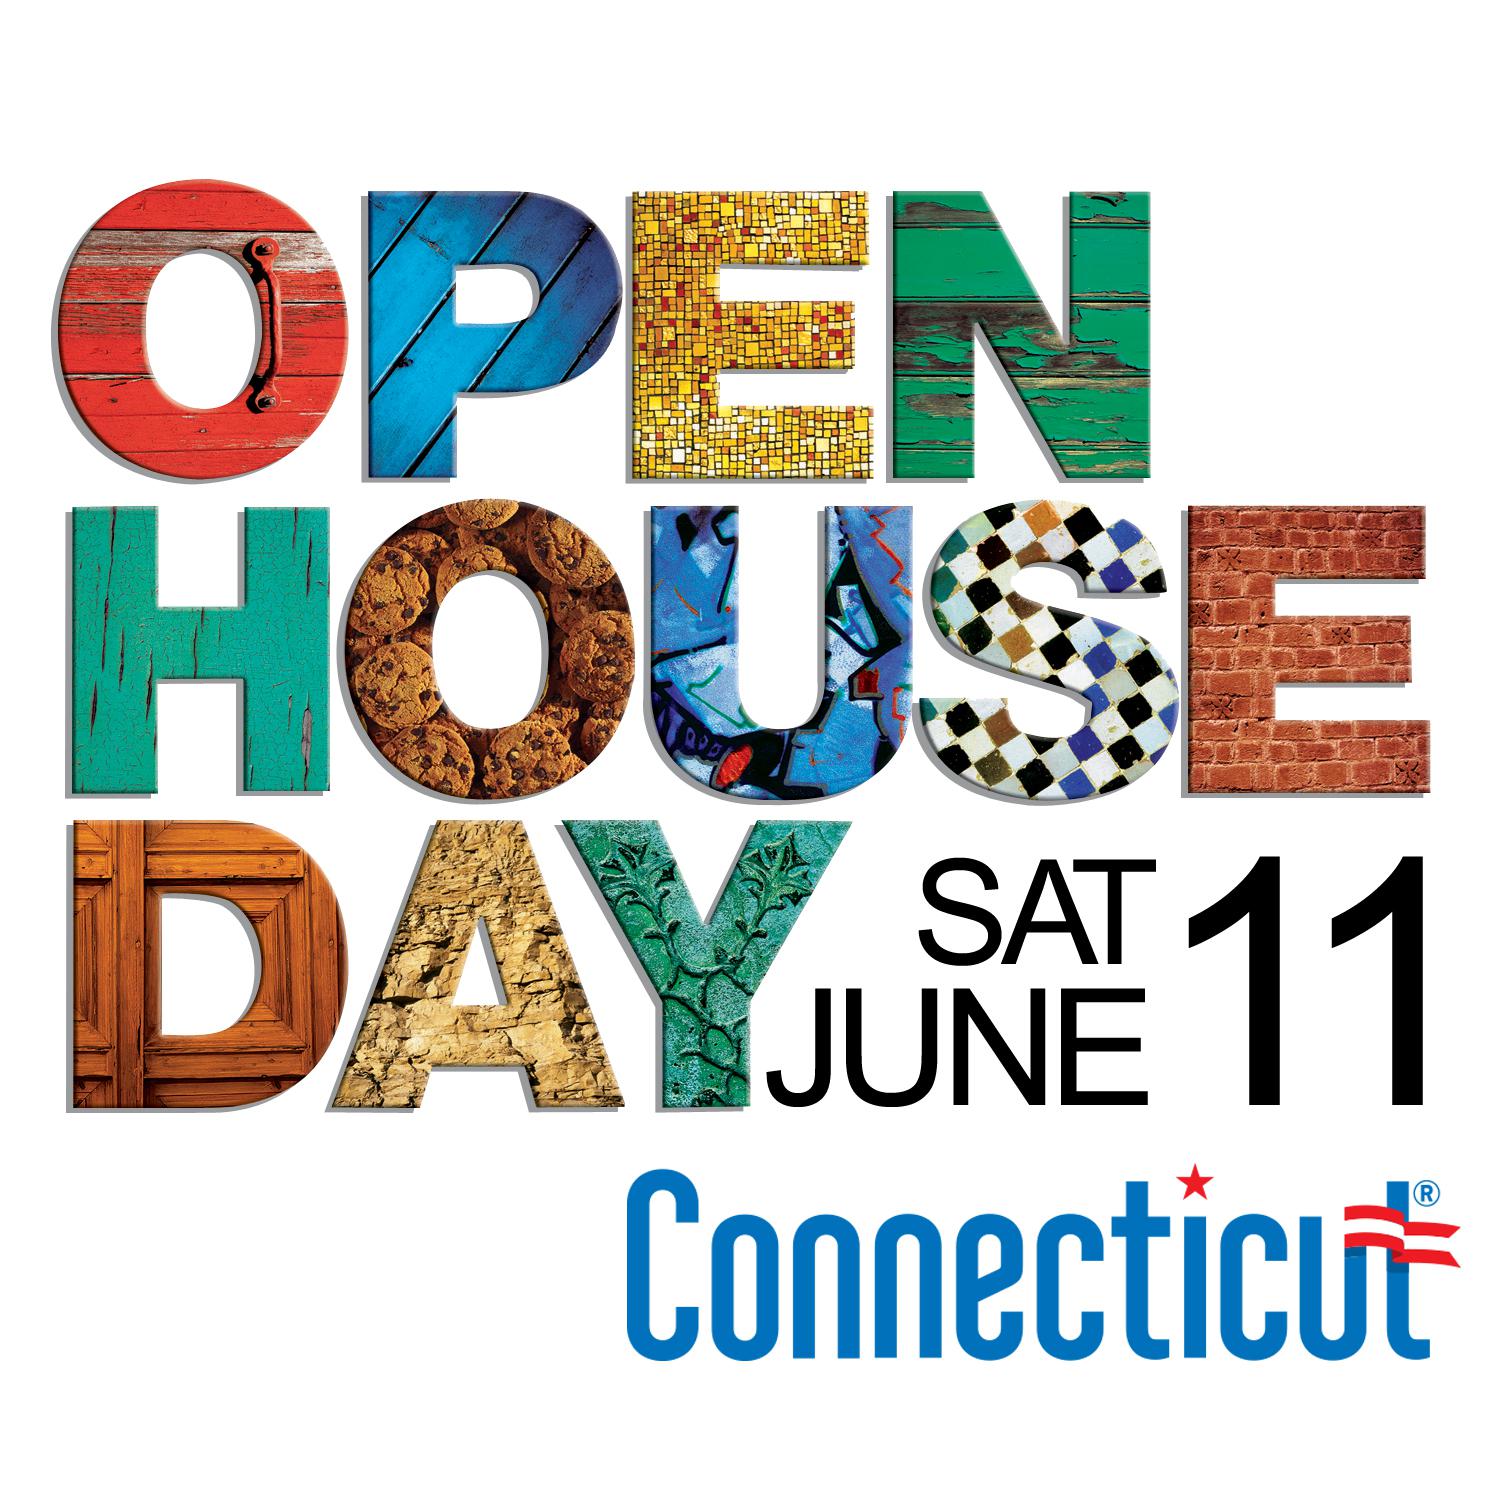 CT Open House Day offers free or discounted entry to attractions